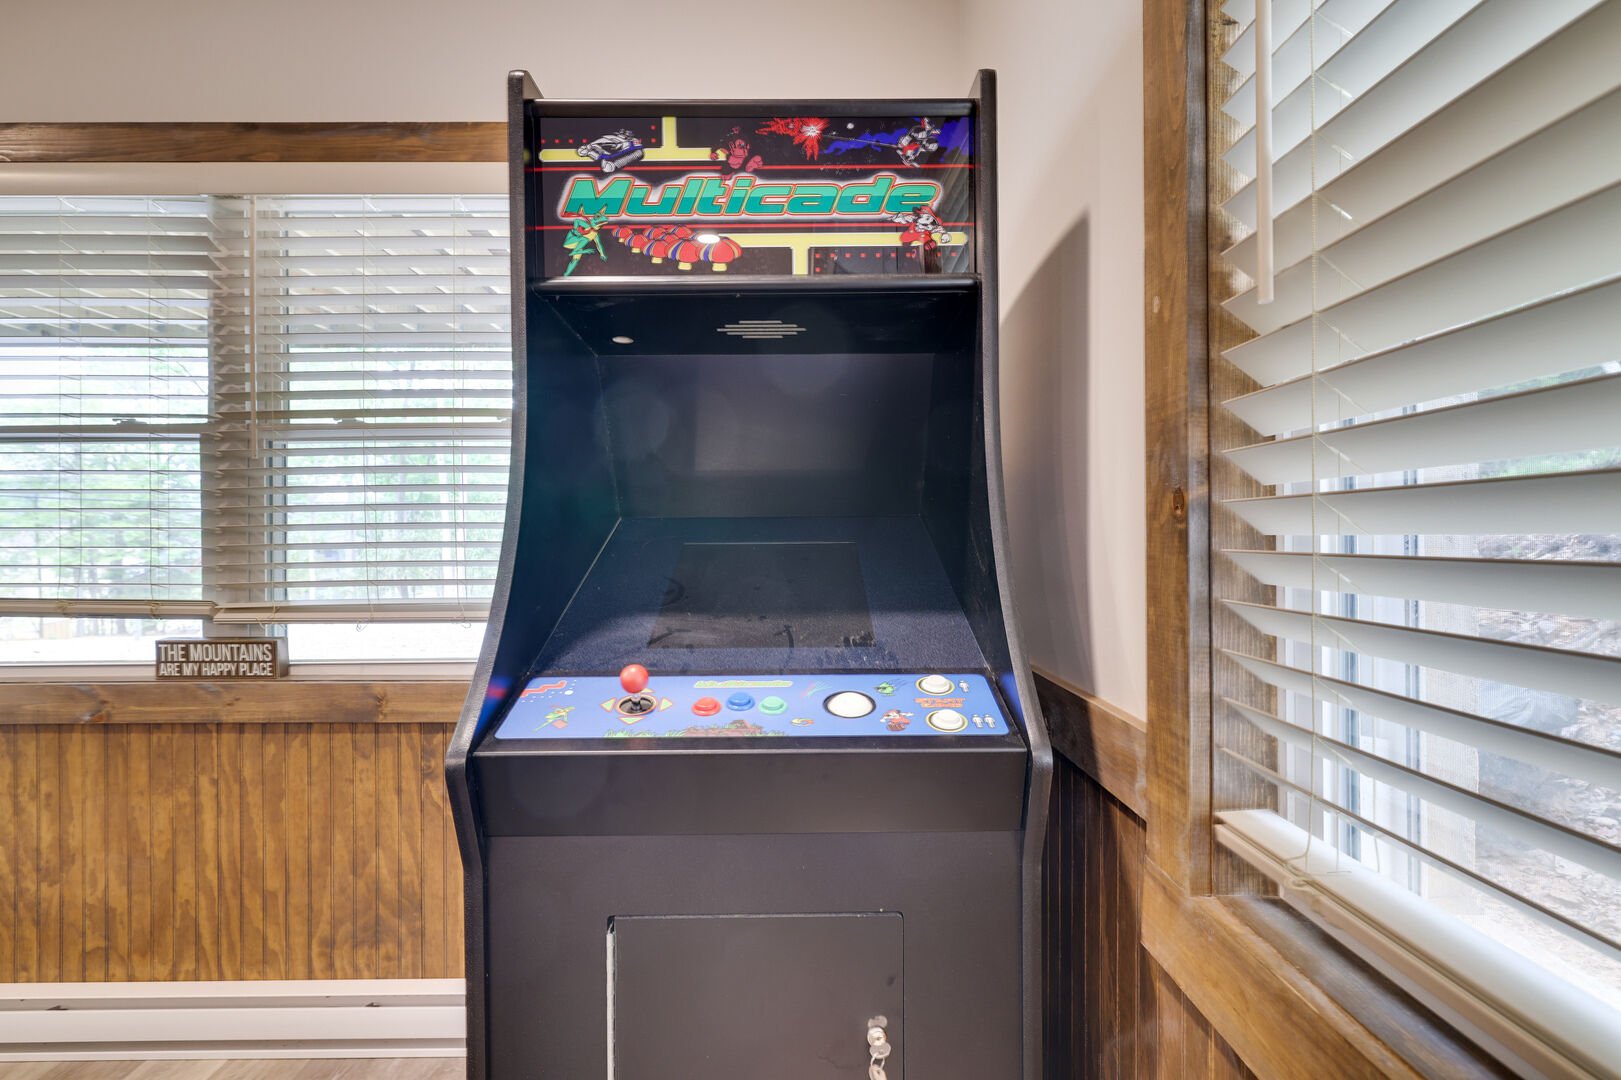 Got Skillz?
Get a High Score on this Old School Arcade Game.